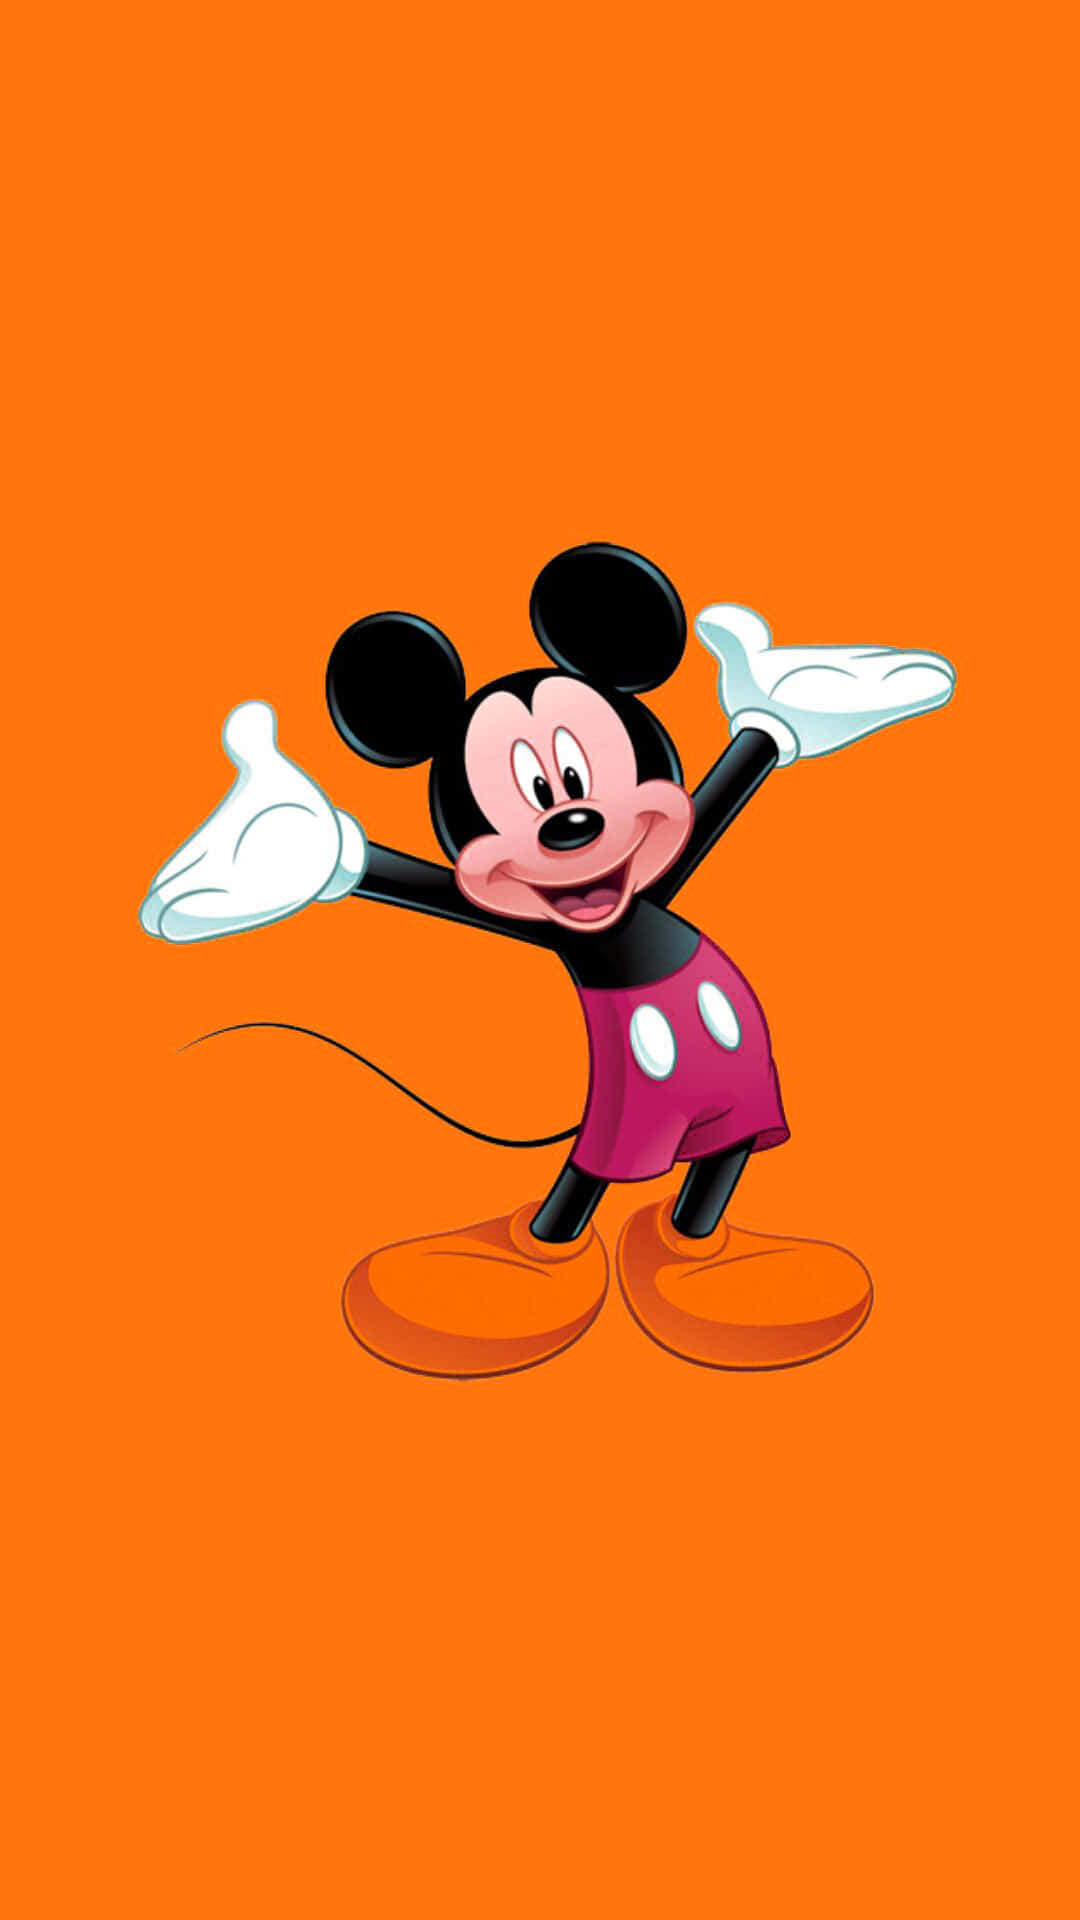 Mickey Mouse takes style to the next level. Wallpaper